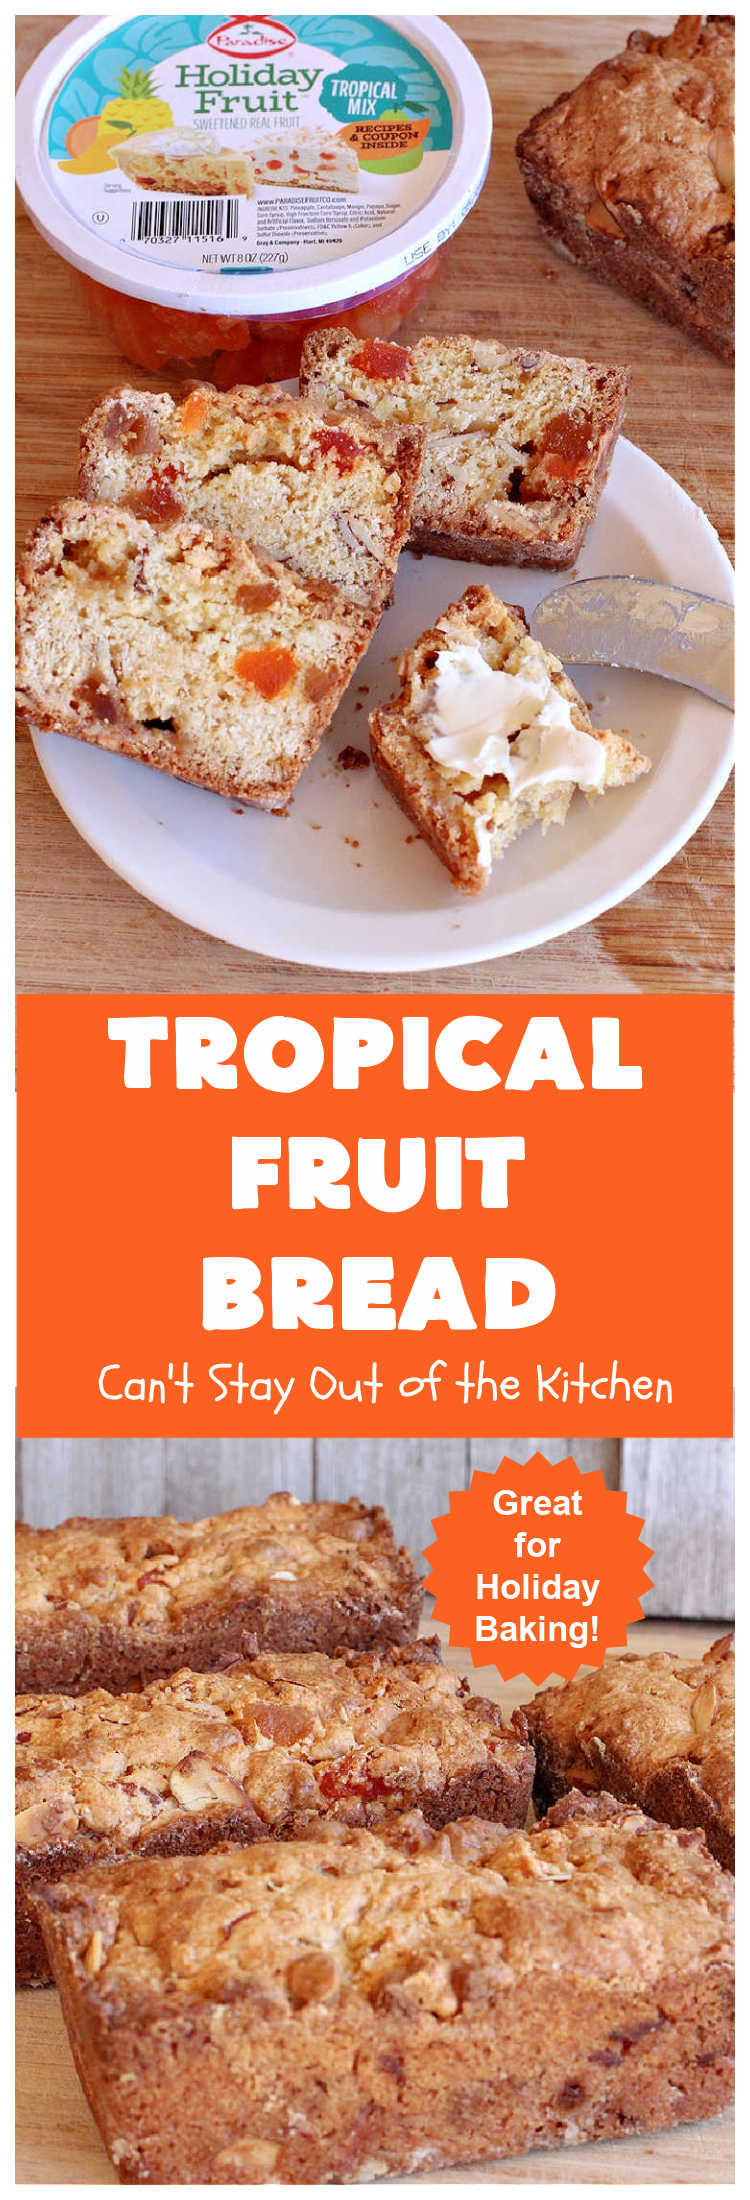 Tropical Fruit Bread | Can't Stay Out of the Kitchen | this luscious sweet #bread includes #almonds, vanilla chips & #ParadiseFruitCompany's #TropicalFruitMix. It's sweet, crunchy and so satisfying. Terrific for a #holiday #breakfast like #Thanksgiving, #Christmas or #NewYearsDay or for sometime during the season. #ParadiseFruitCo #ParadiseCandiedFruit #mango #pineapple #papaya #cantaloupe #TropicalFruitBread